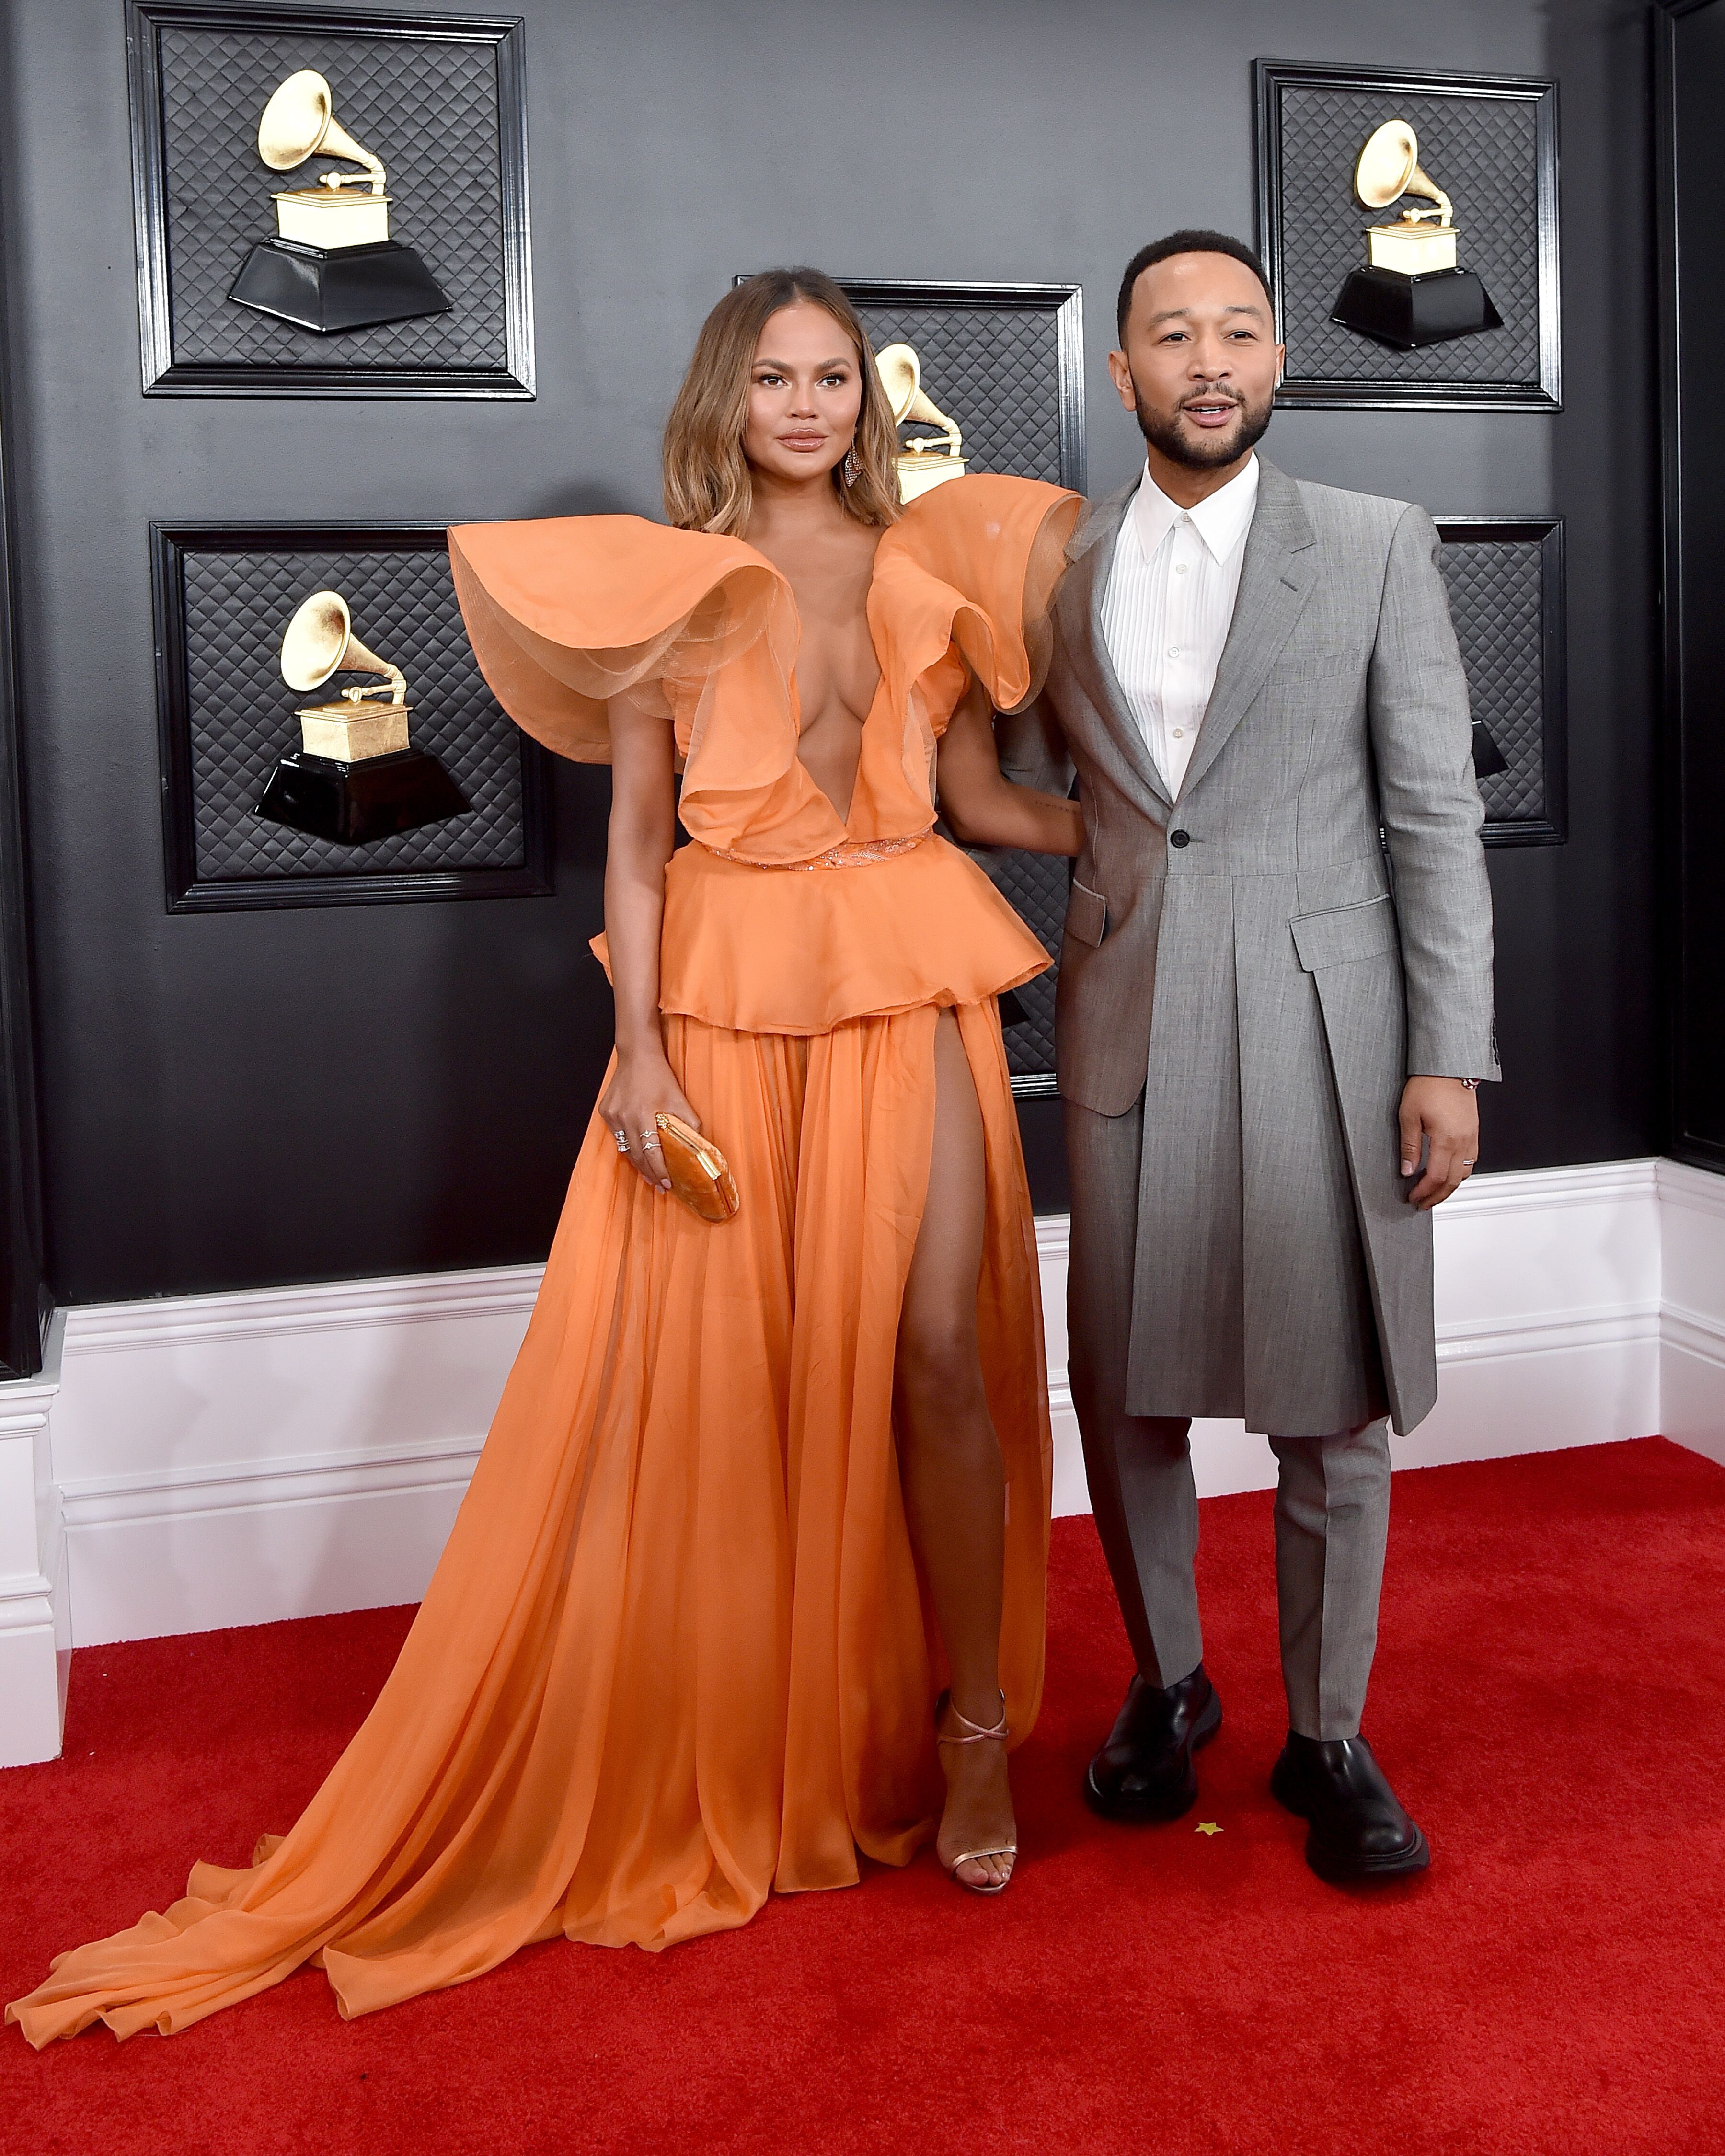 Chrissy Teigen and John Legend attend the 62nd Annual GRAMMY Awards at Staples Center on January 26, 2020 in Los Angeles, California. | Source: Getty Images